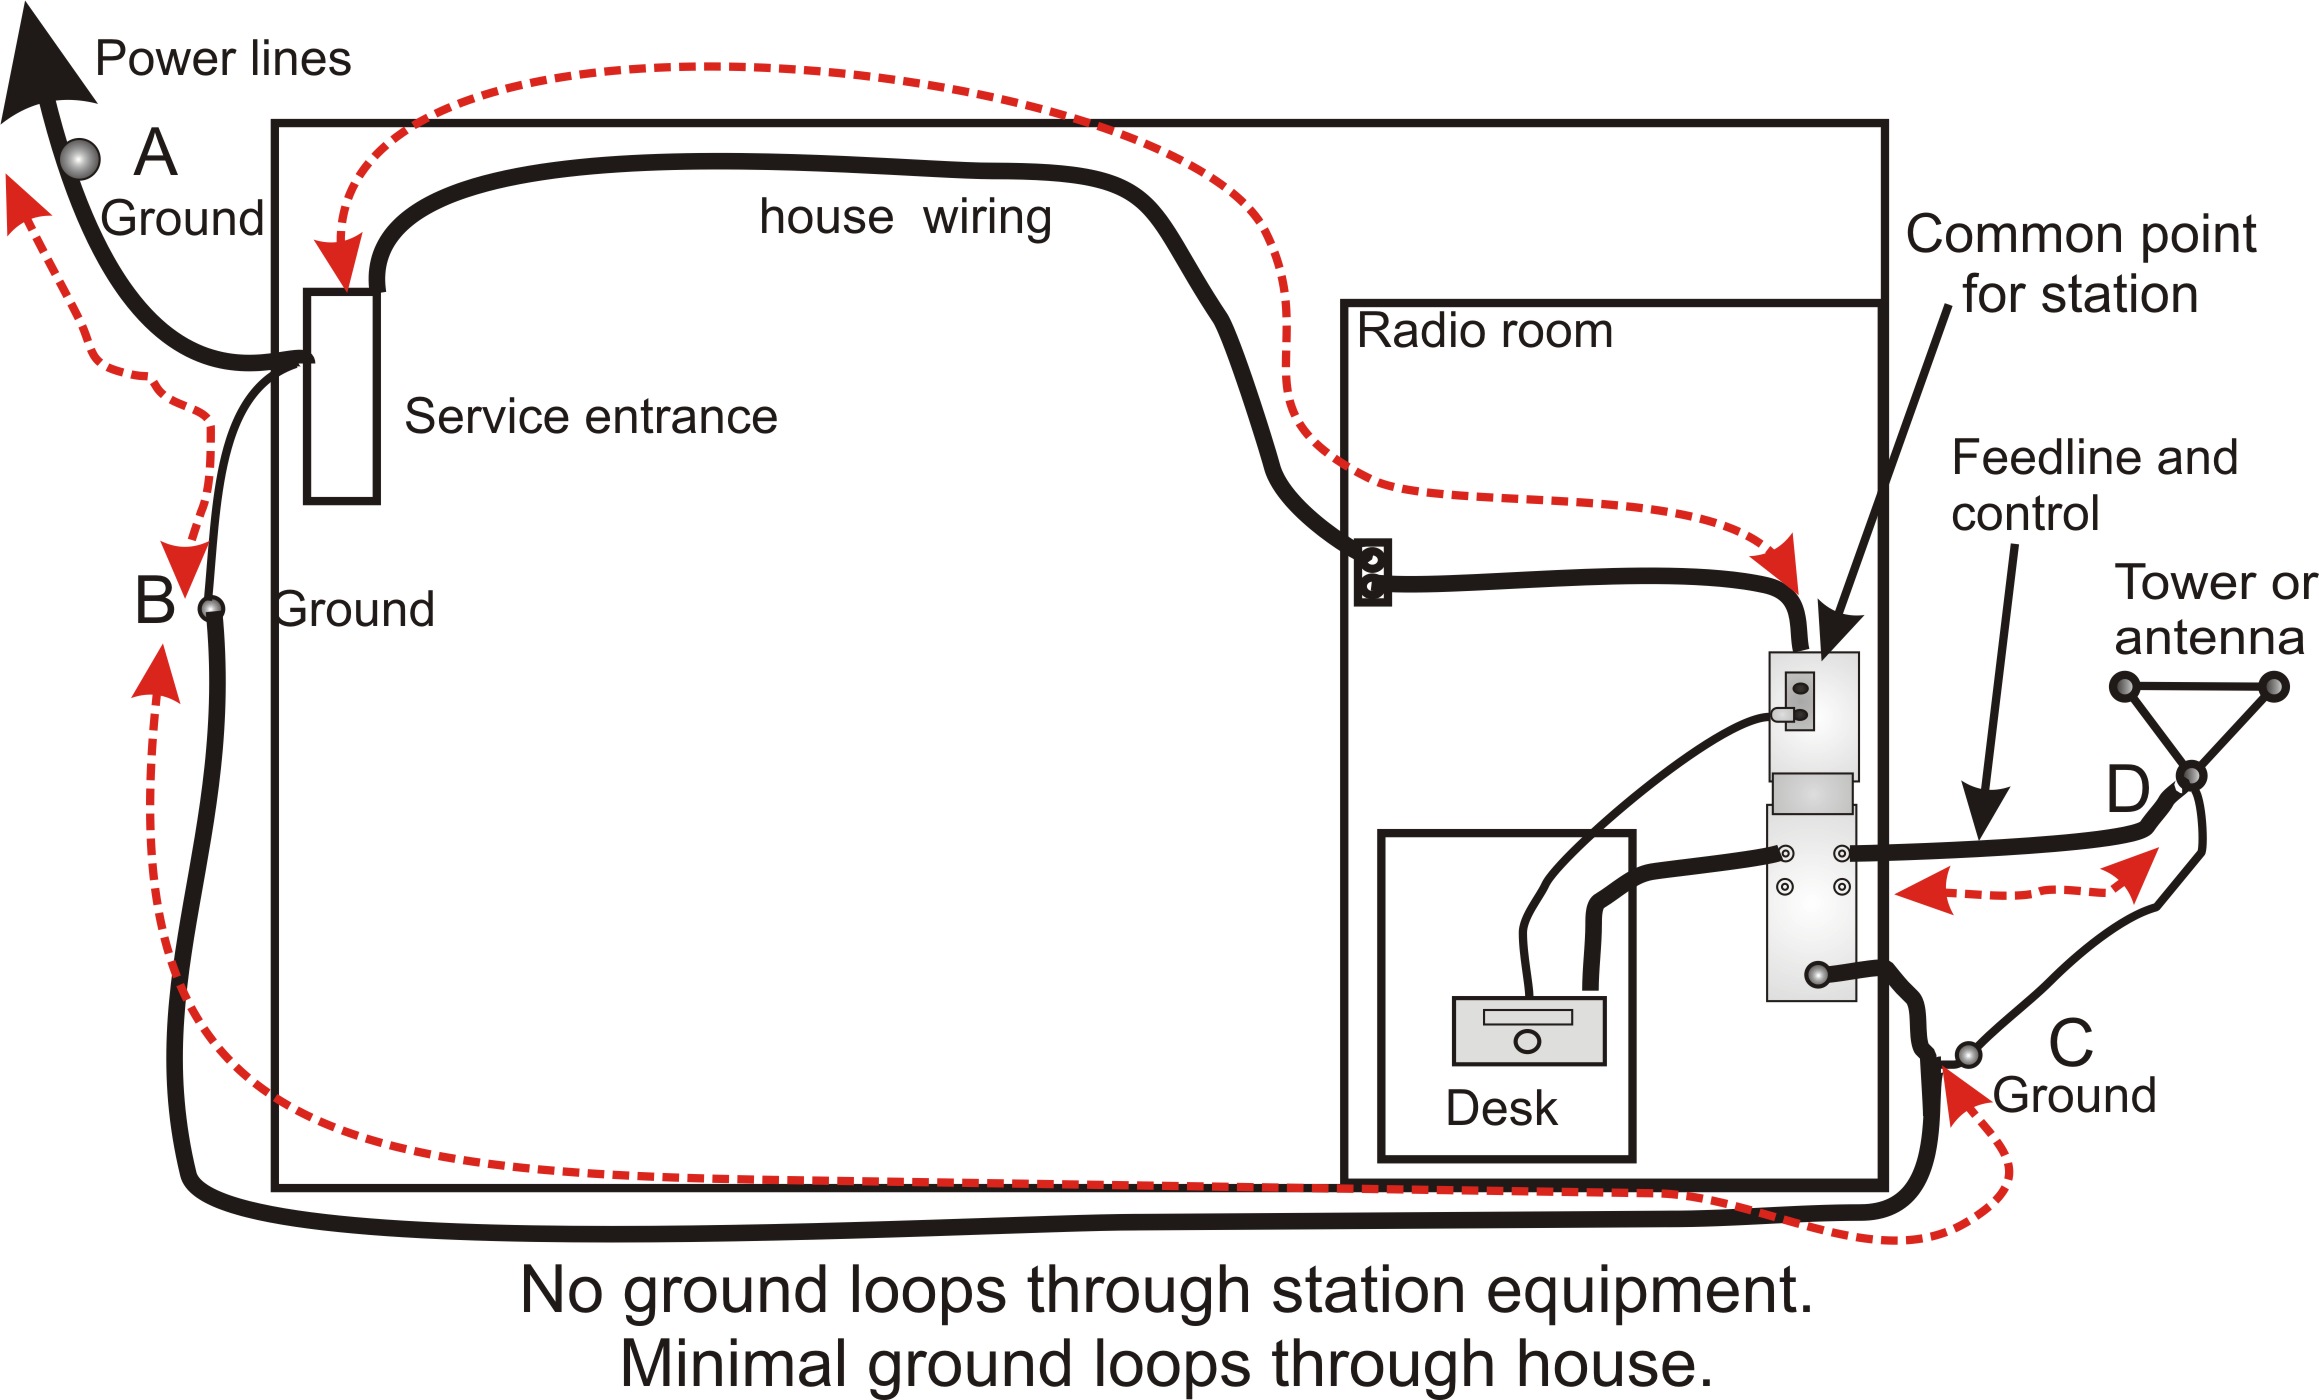 common mode choke - What is the difference between the rated and withstand  Voltage? - Electrical Engineering Stack Exchange